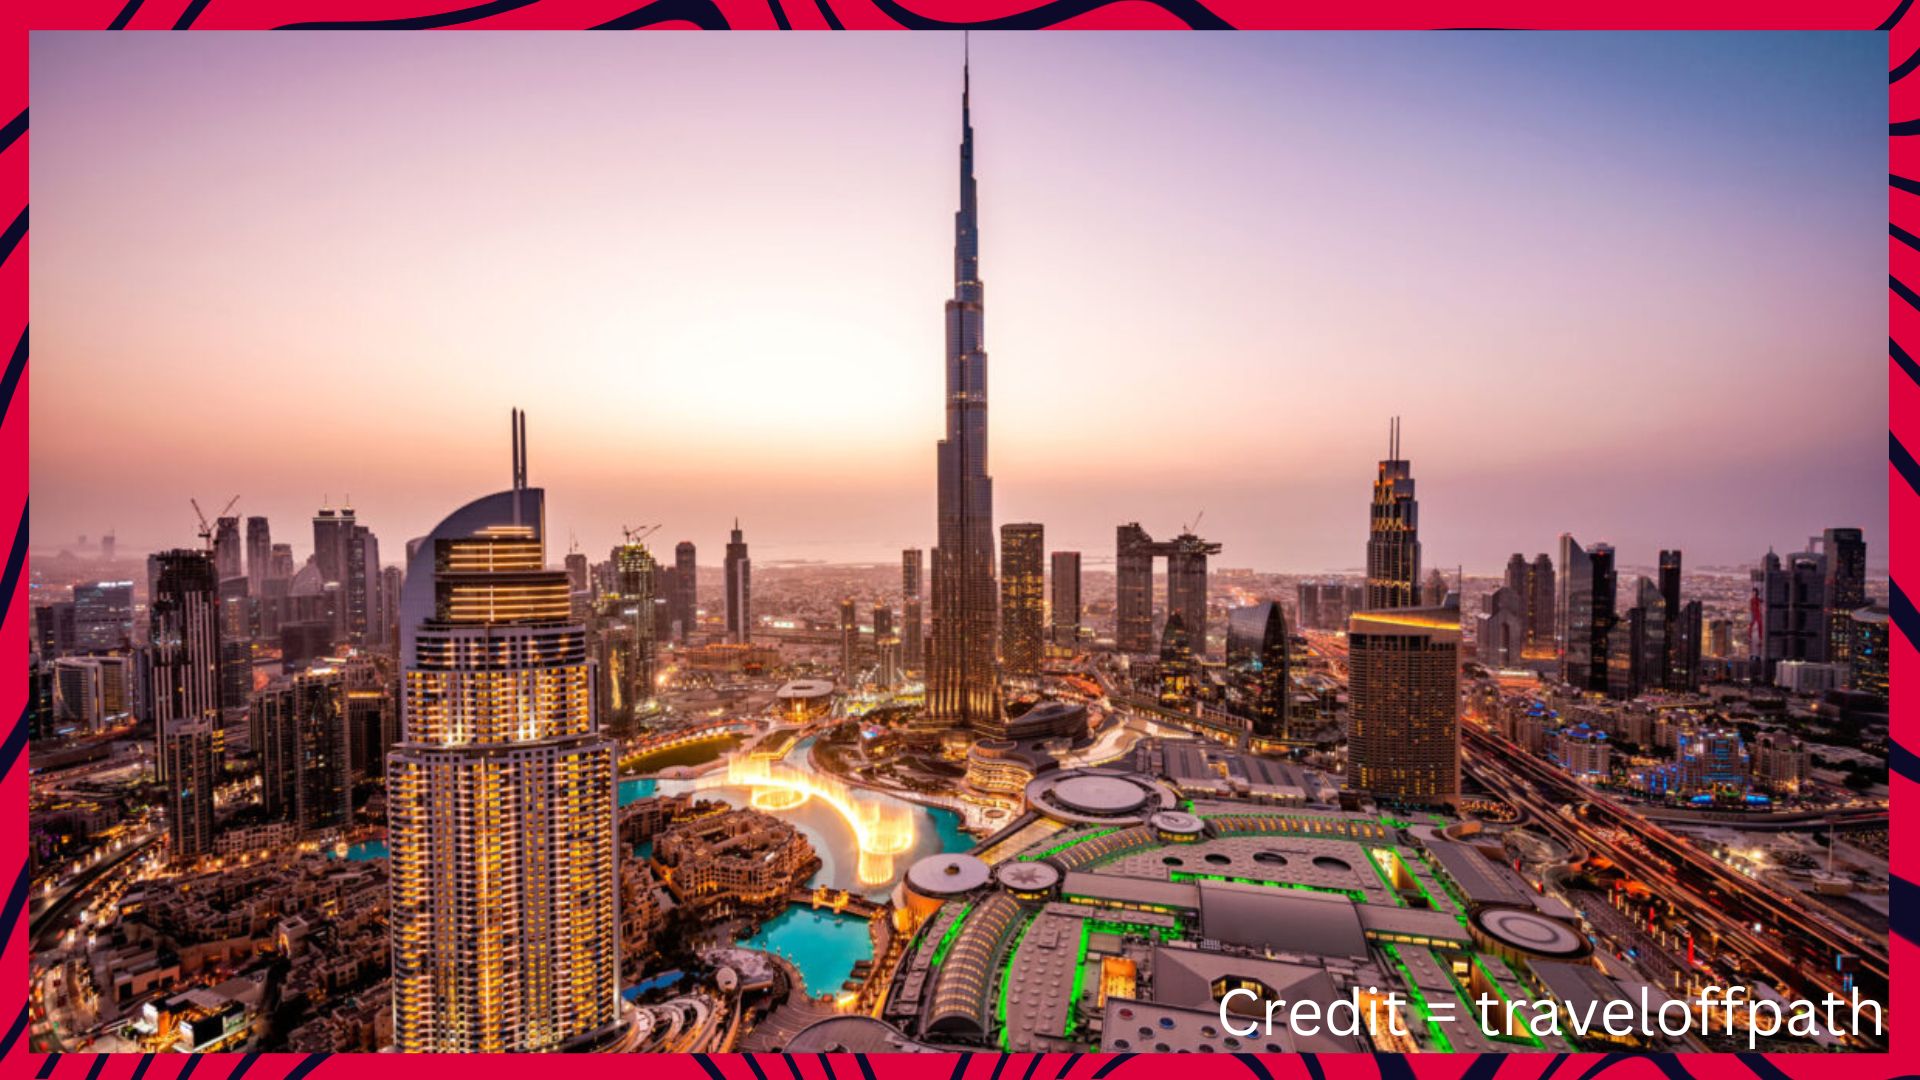 Dubai is the 3rd most popular city in Asia.